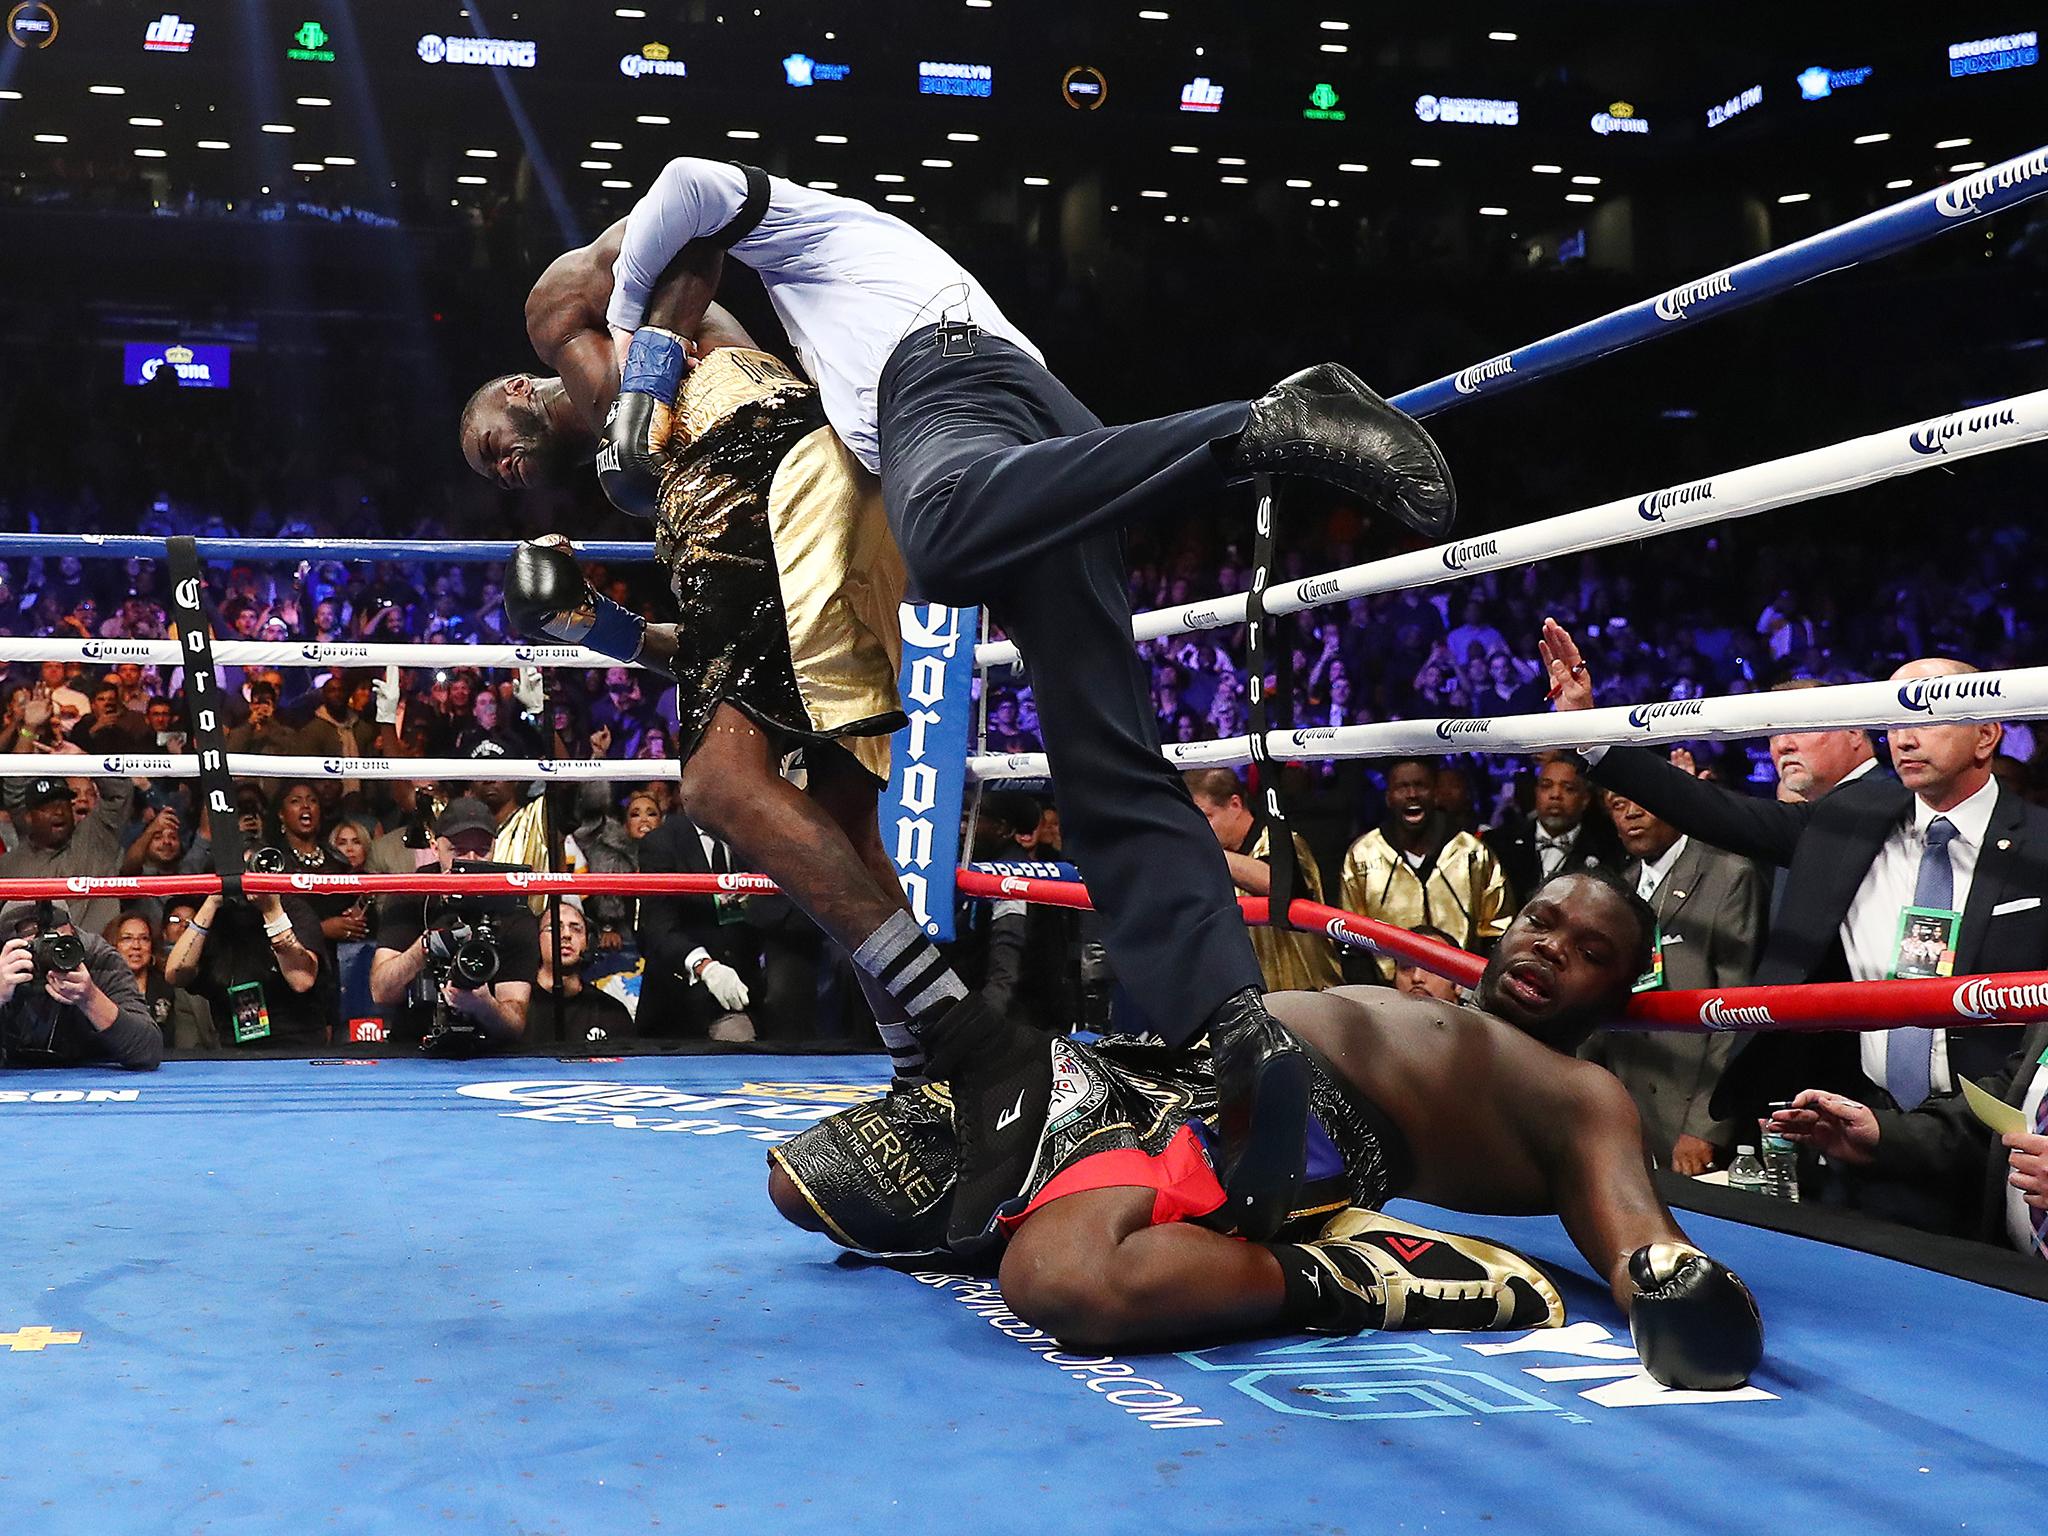 Deontay Wilder beat Bermane Stiverne in the first round to retain his WBC heavyweight title